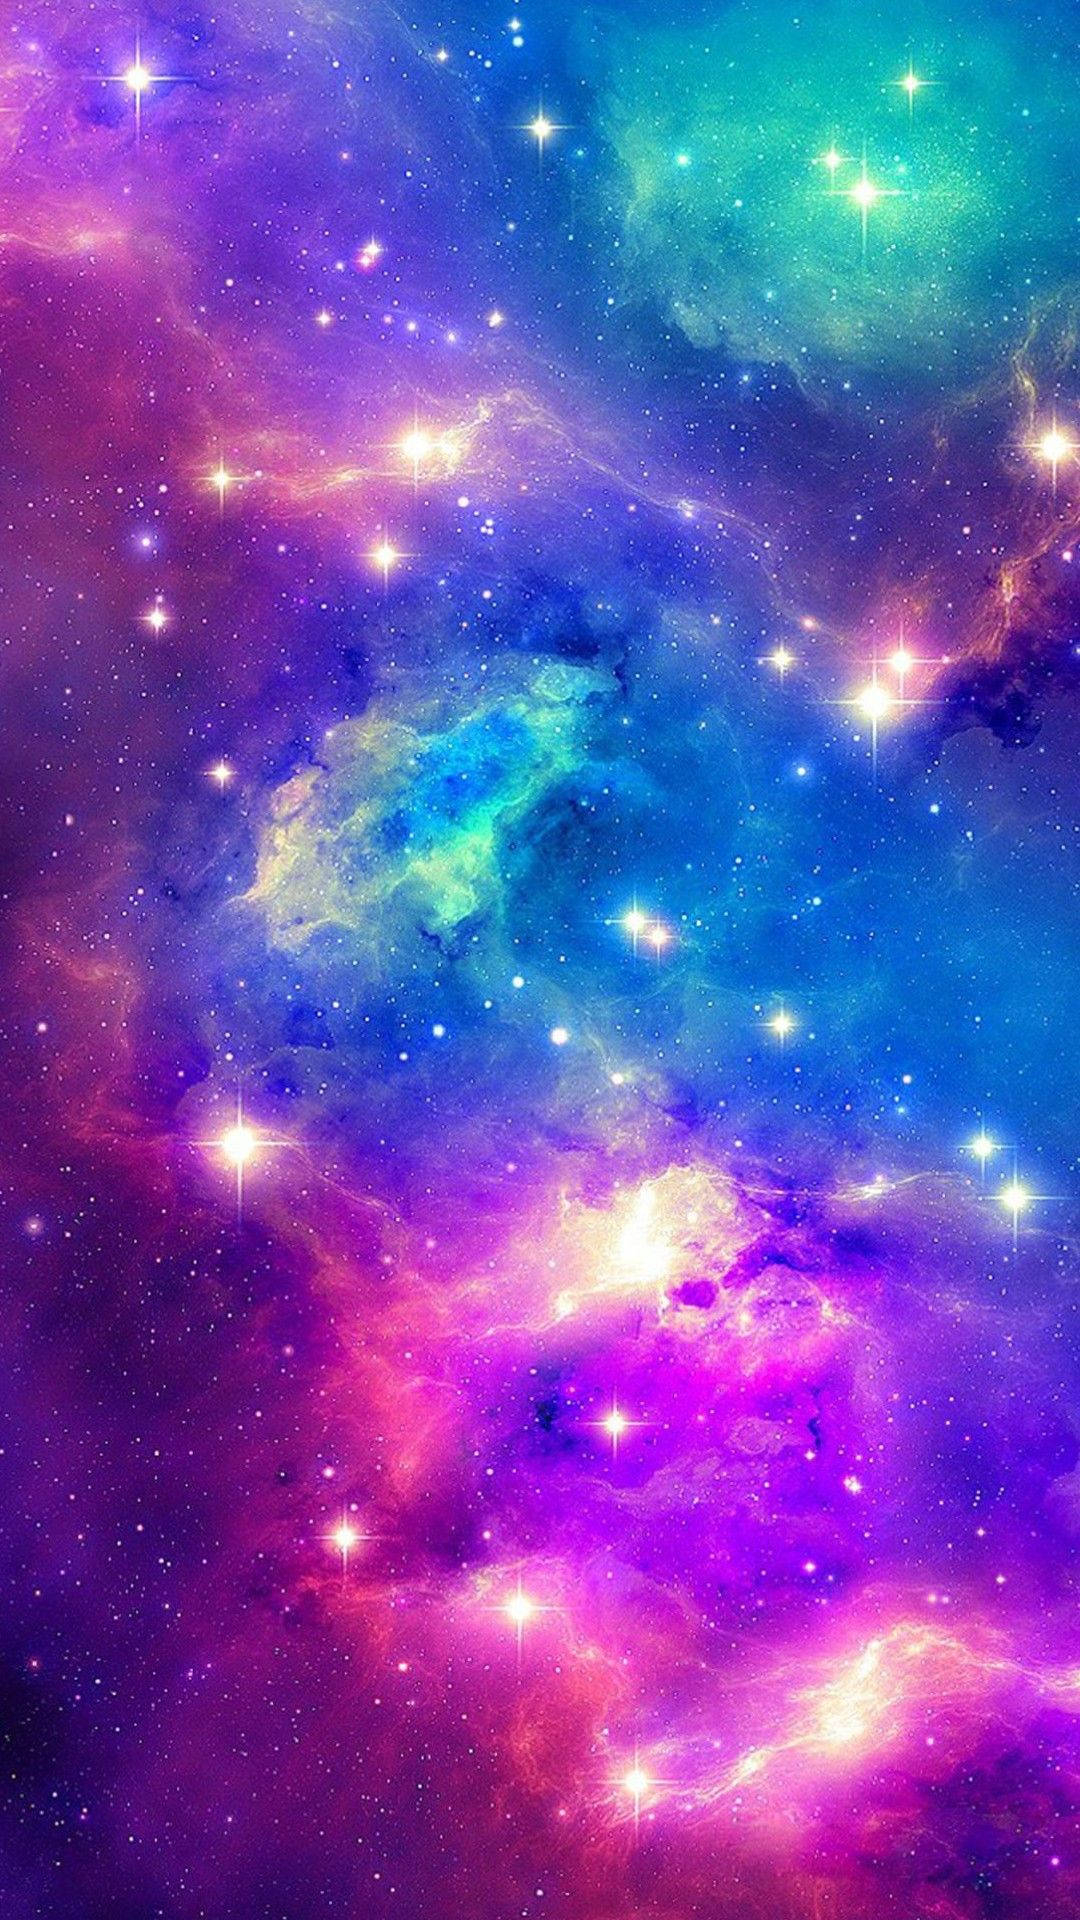 1080x1920 Download Pink And Purple Cosmic Galaxy Wallpaper